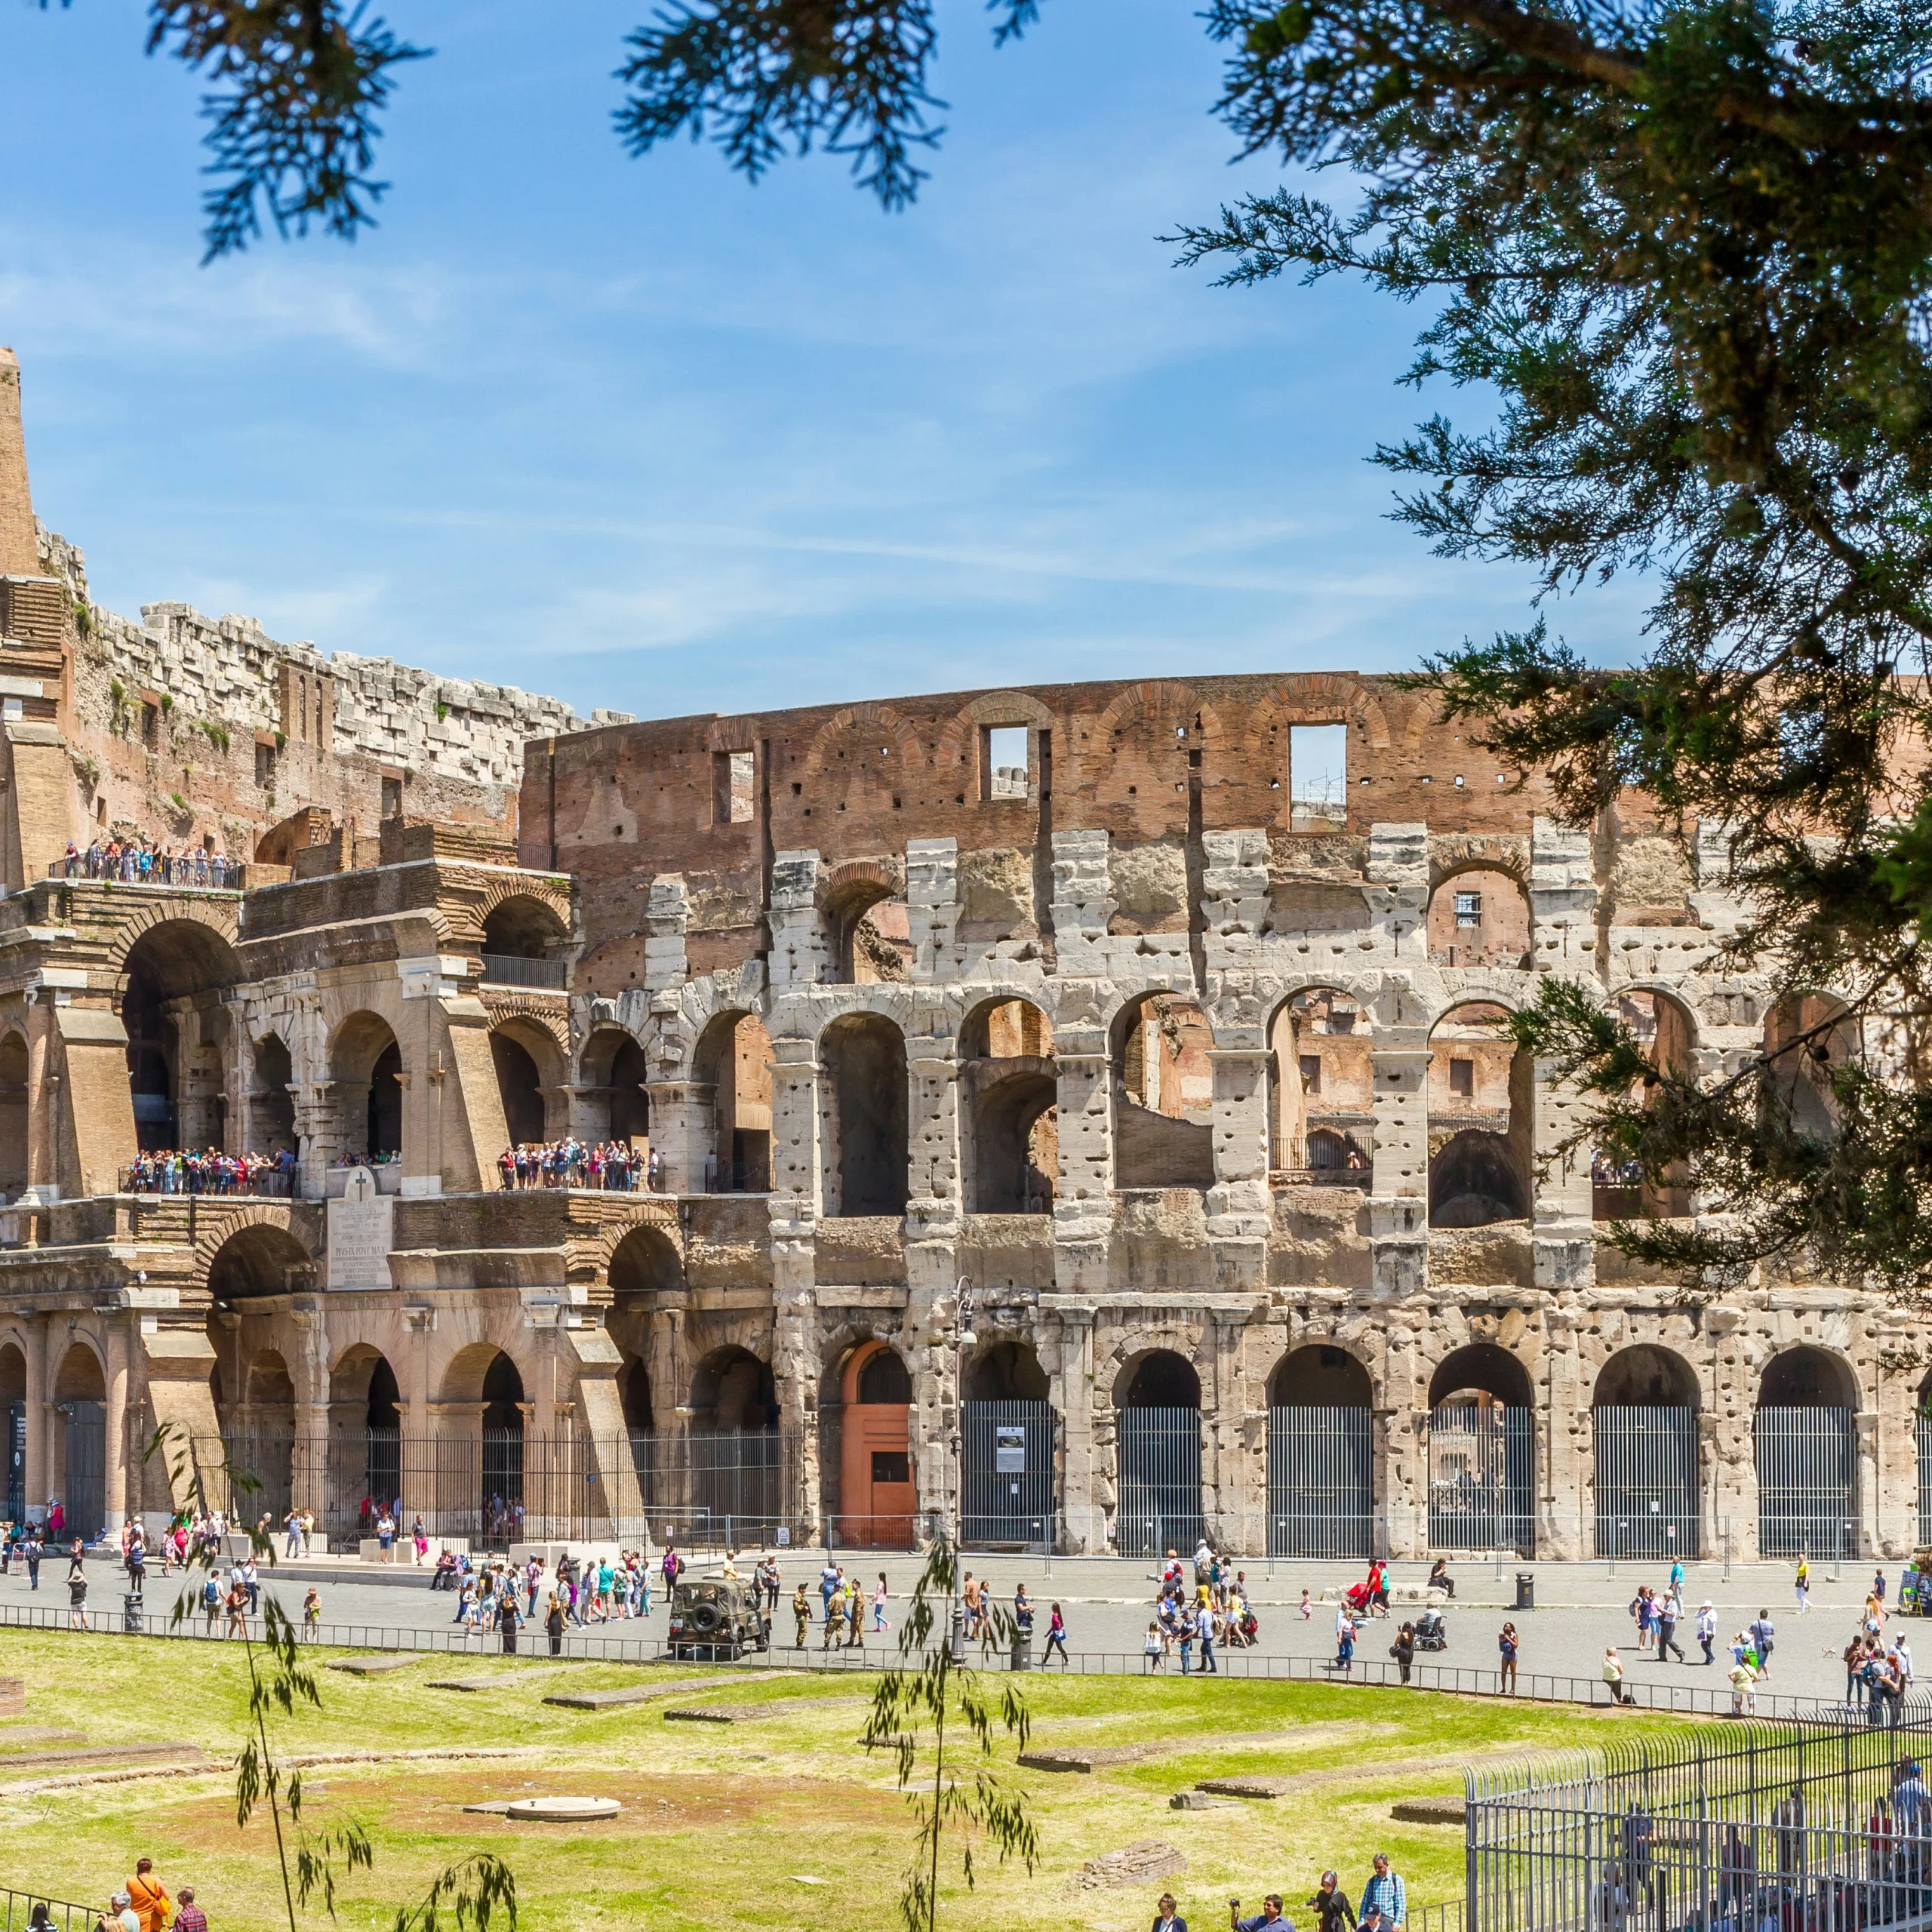 Is it possible to skip the line for the Colosseum underground tour?